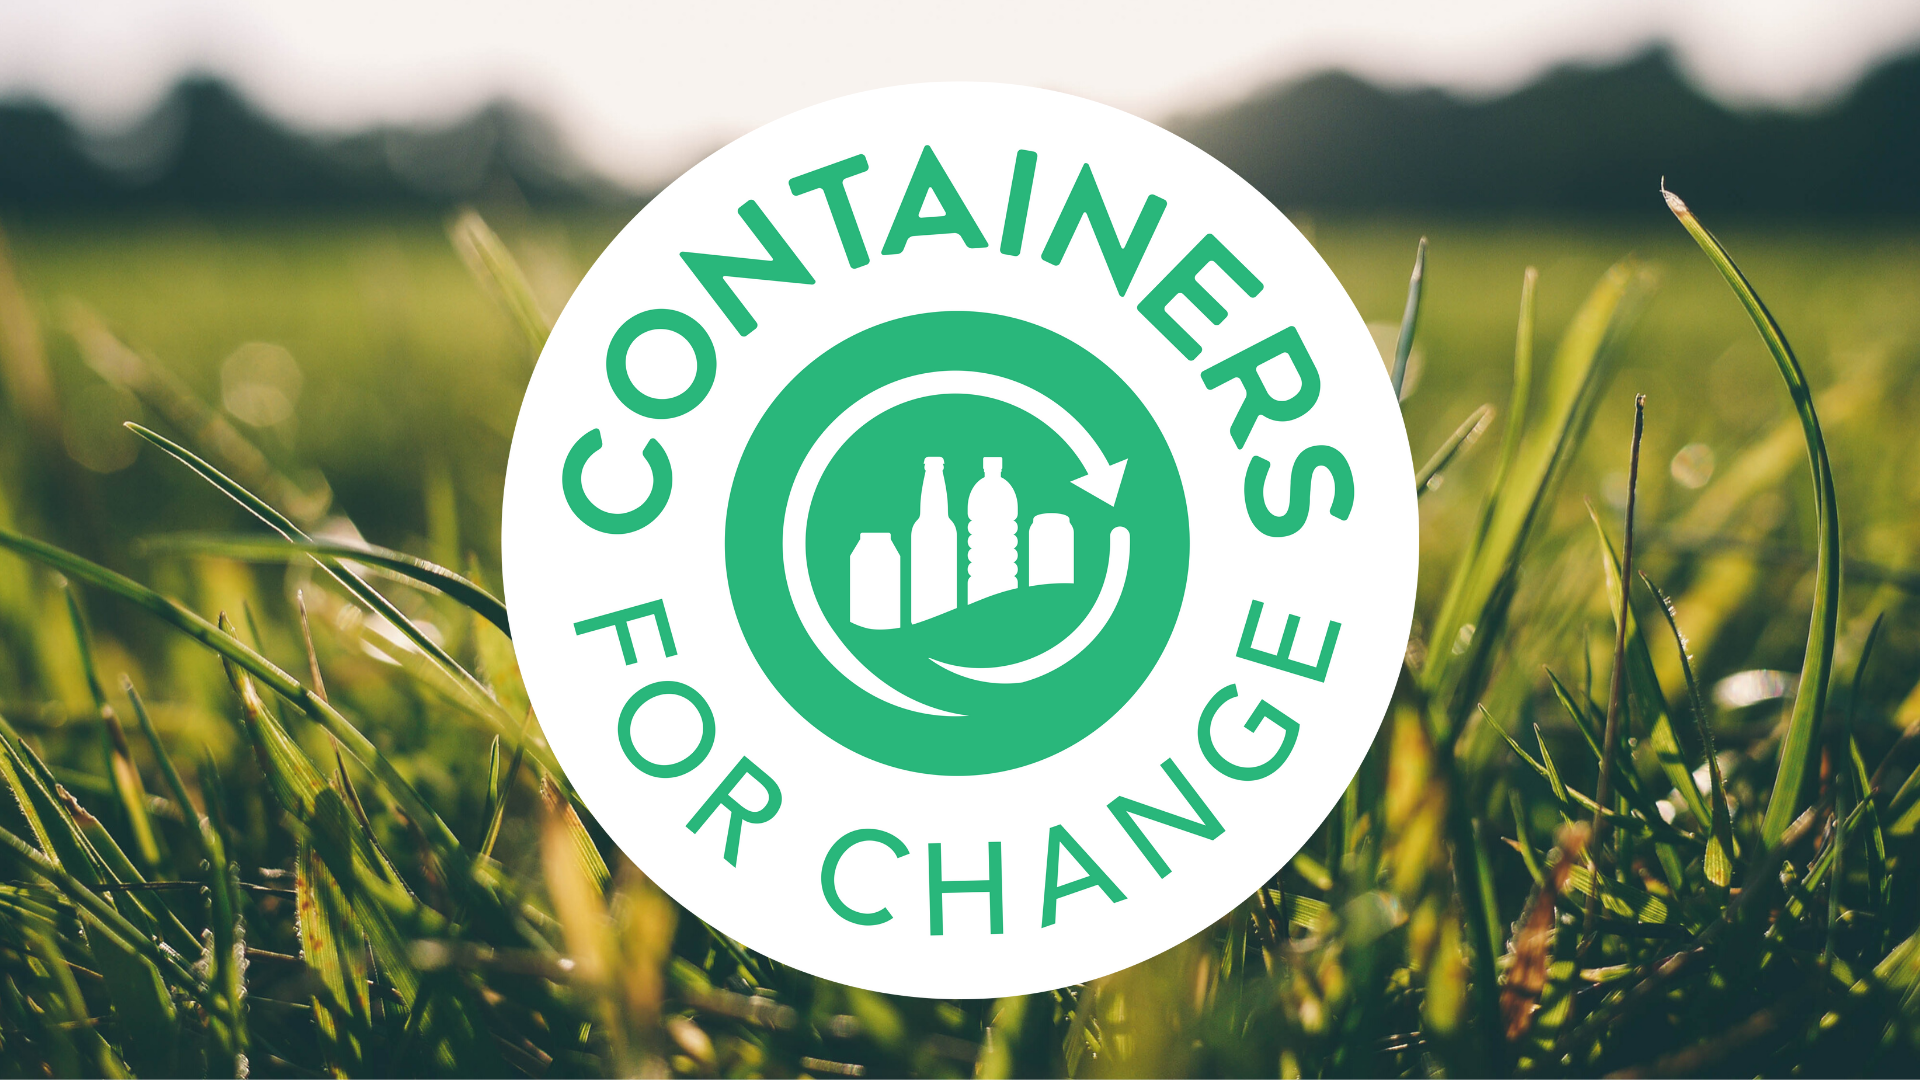 Containers-for-Change-tile-image